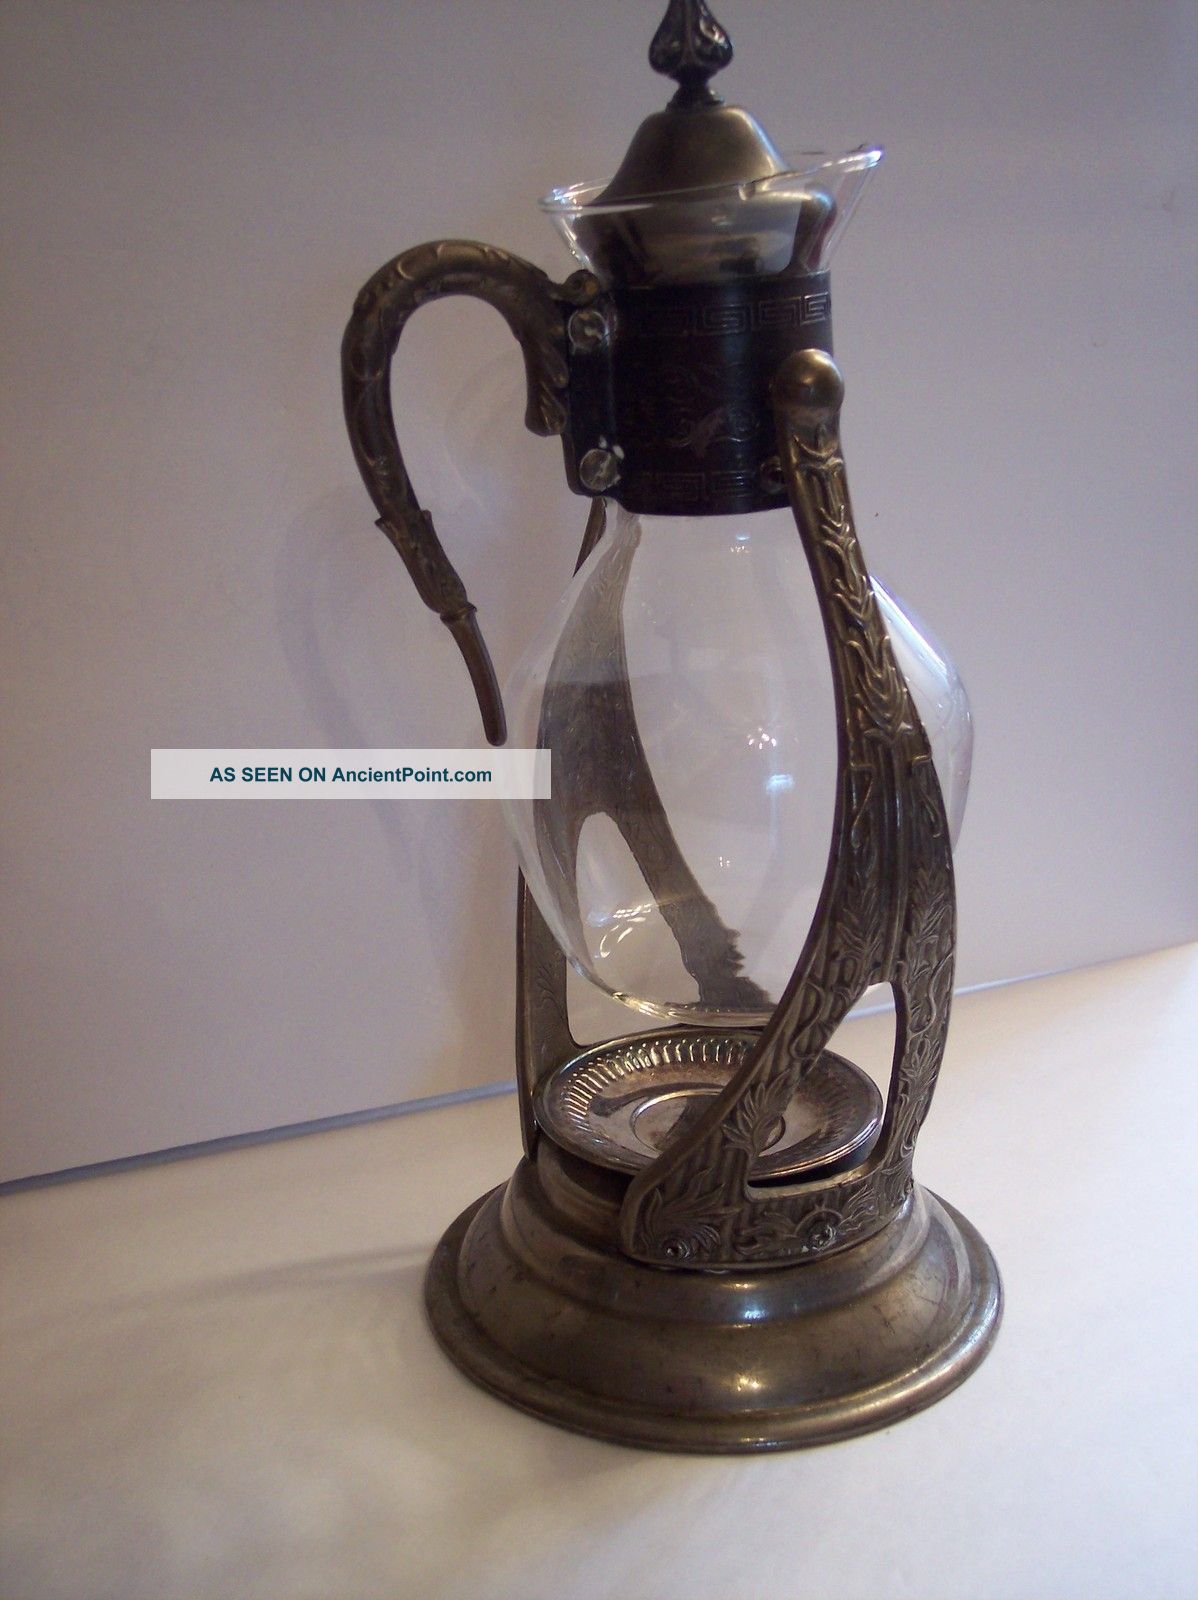 Silver Plate and Glass Coffee Carafe, Silver Plated Warming Stand